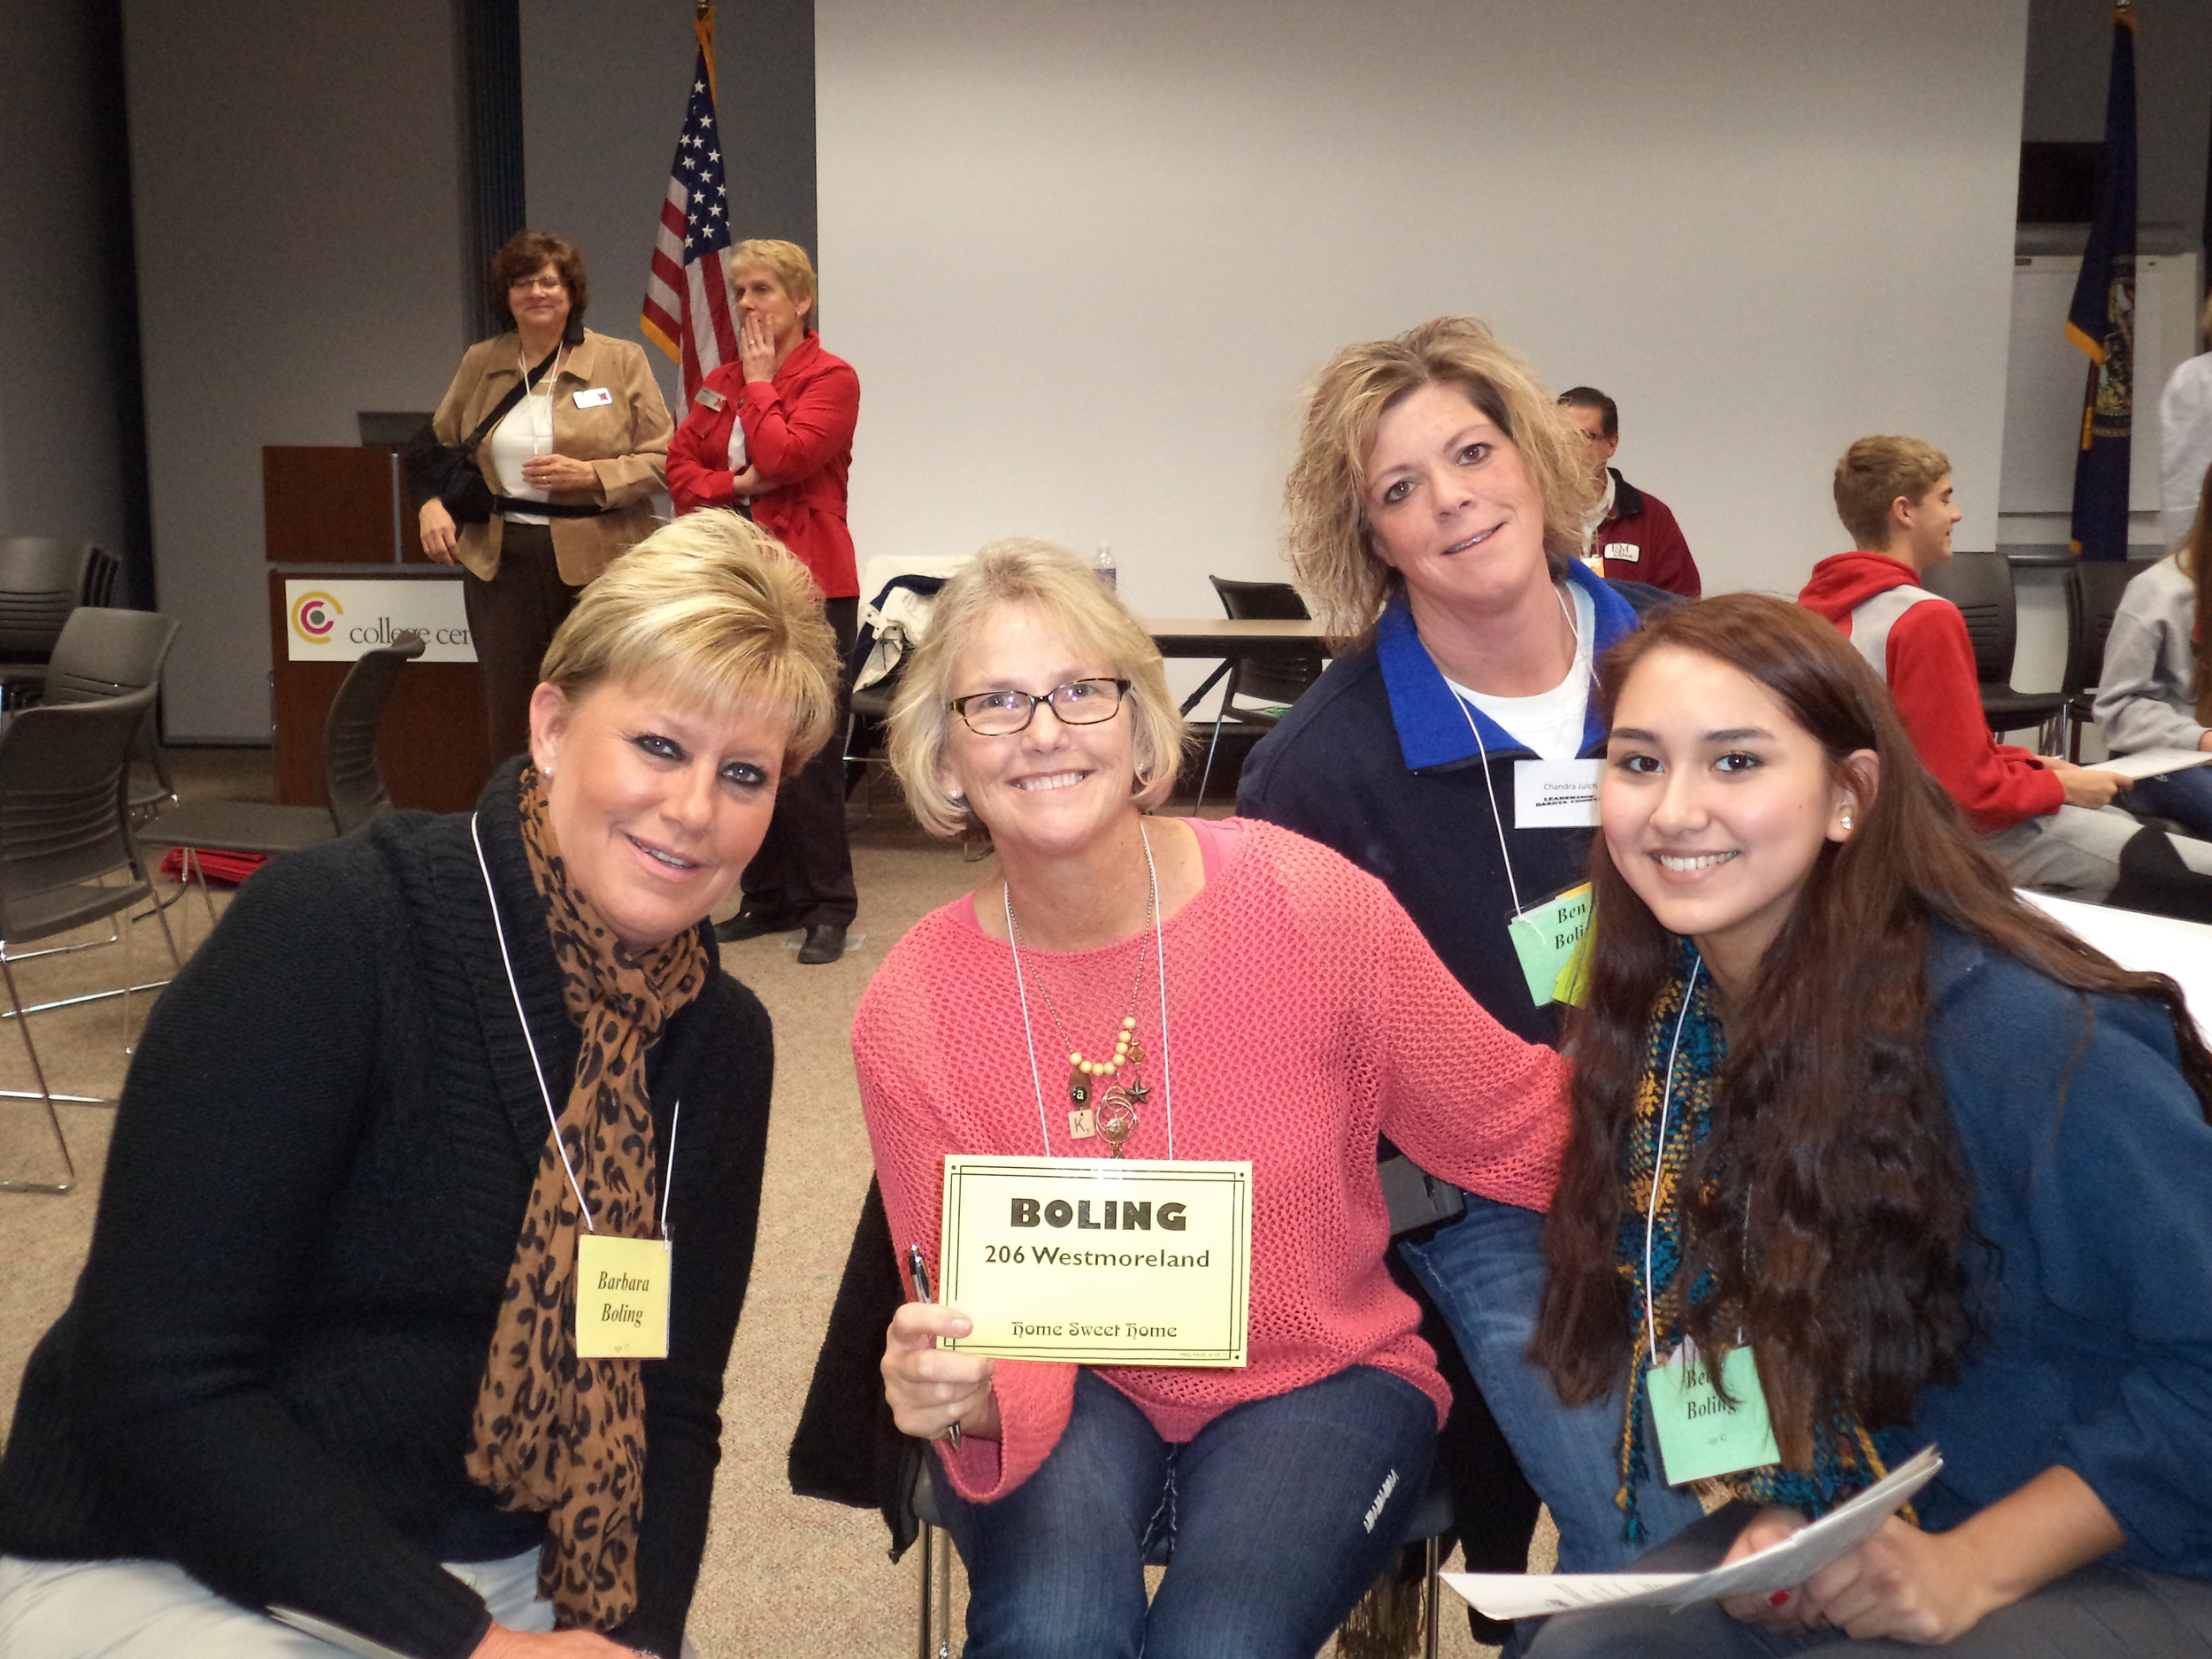 Poverty Simulation-Boling Family-Colleen,Chancra,student, Kathy Addison.JPG